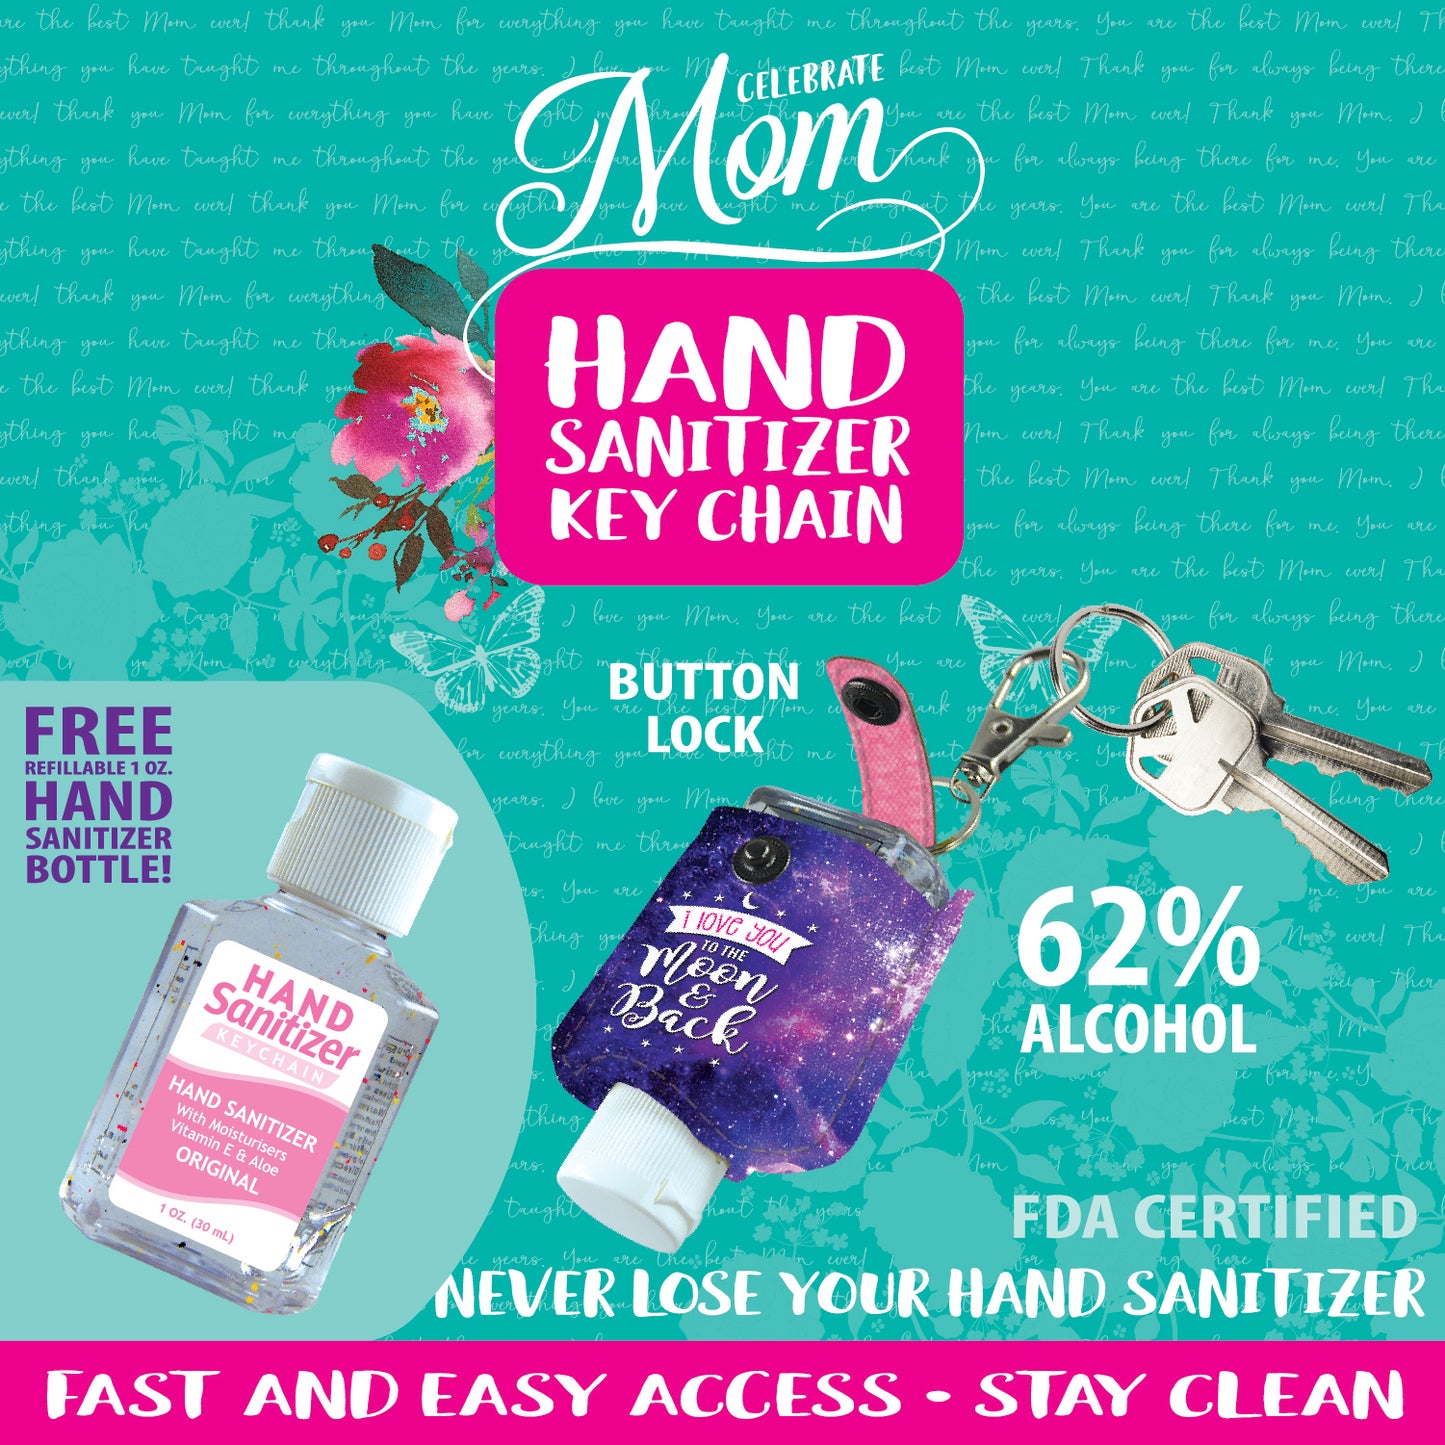 ITEM NUMBER 022108 MOTHER'S DAY HAND SANITIZER 12 PIECES PER DISPLAY